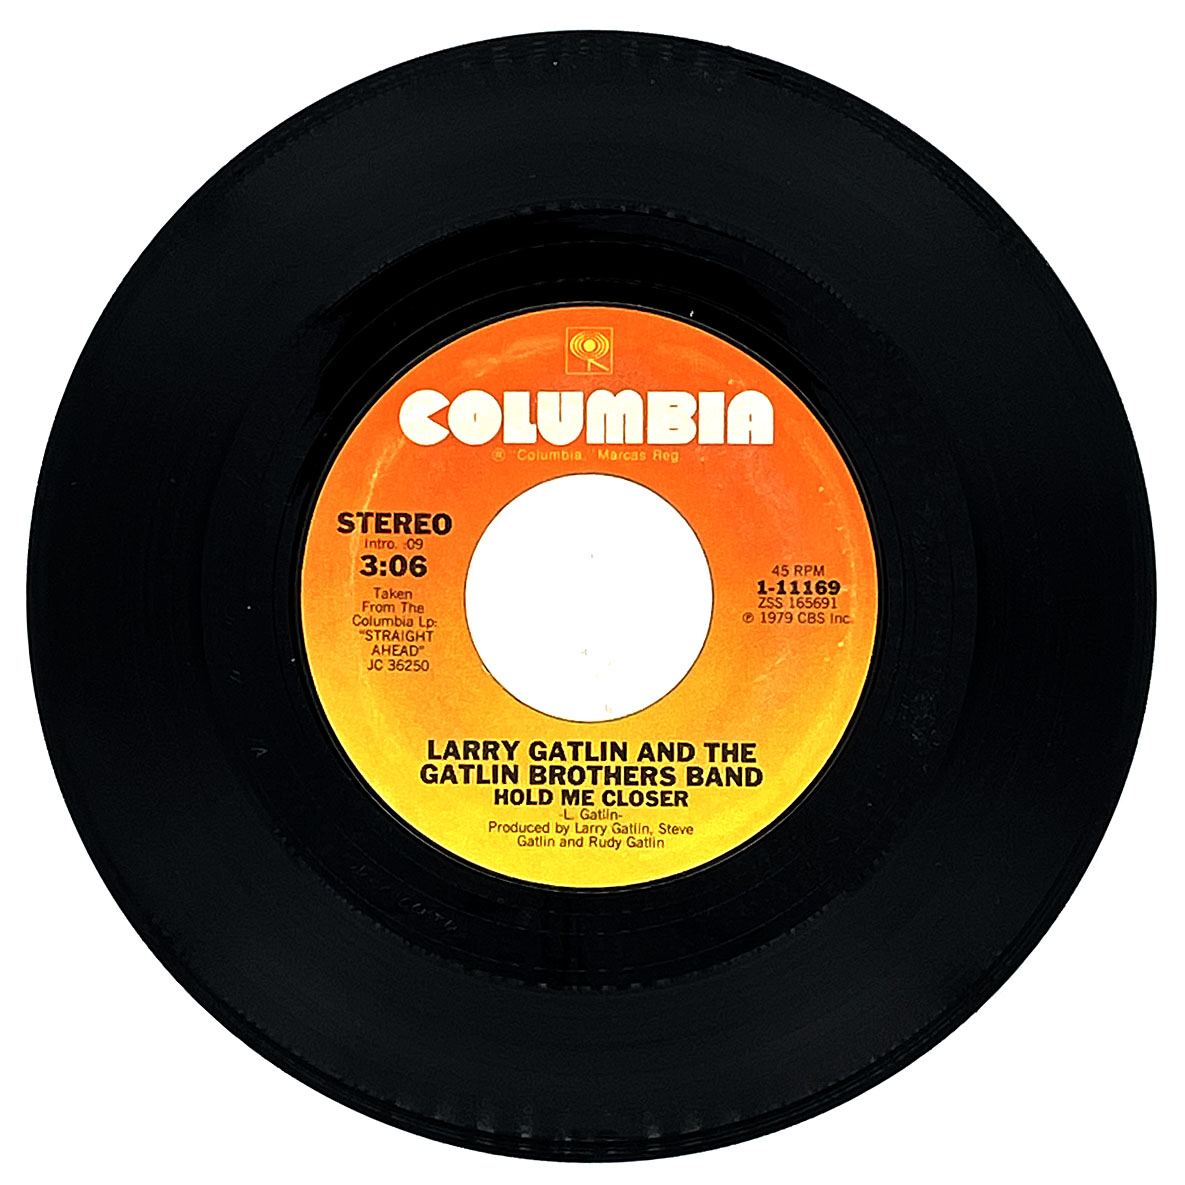 Larry Gatlin And The Gatlin Brothers Band : HOLD ME CLOSER/ THE MIDNIGHT CHOIR